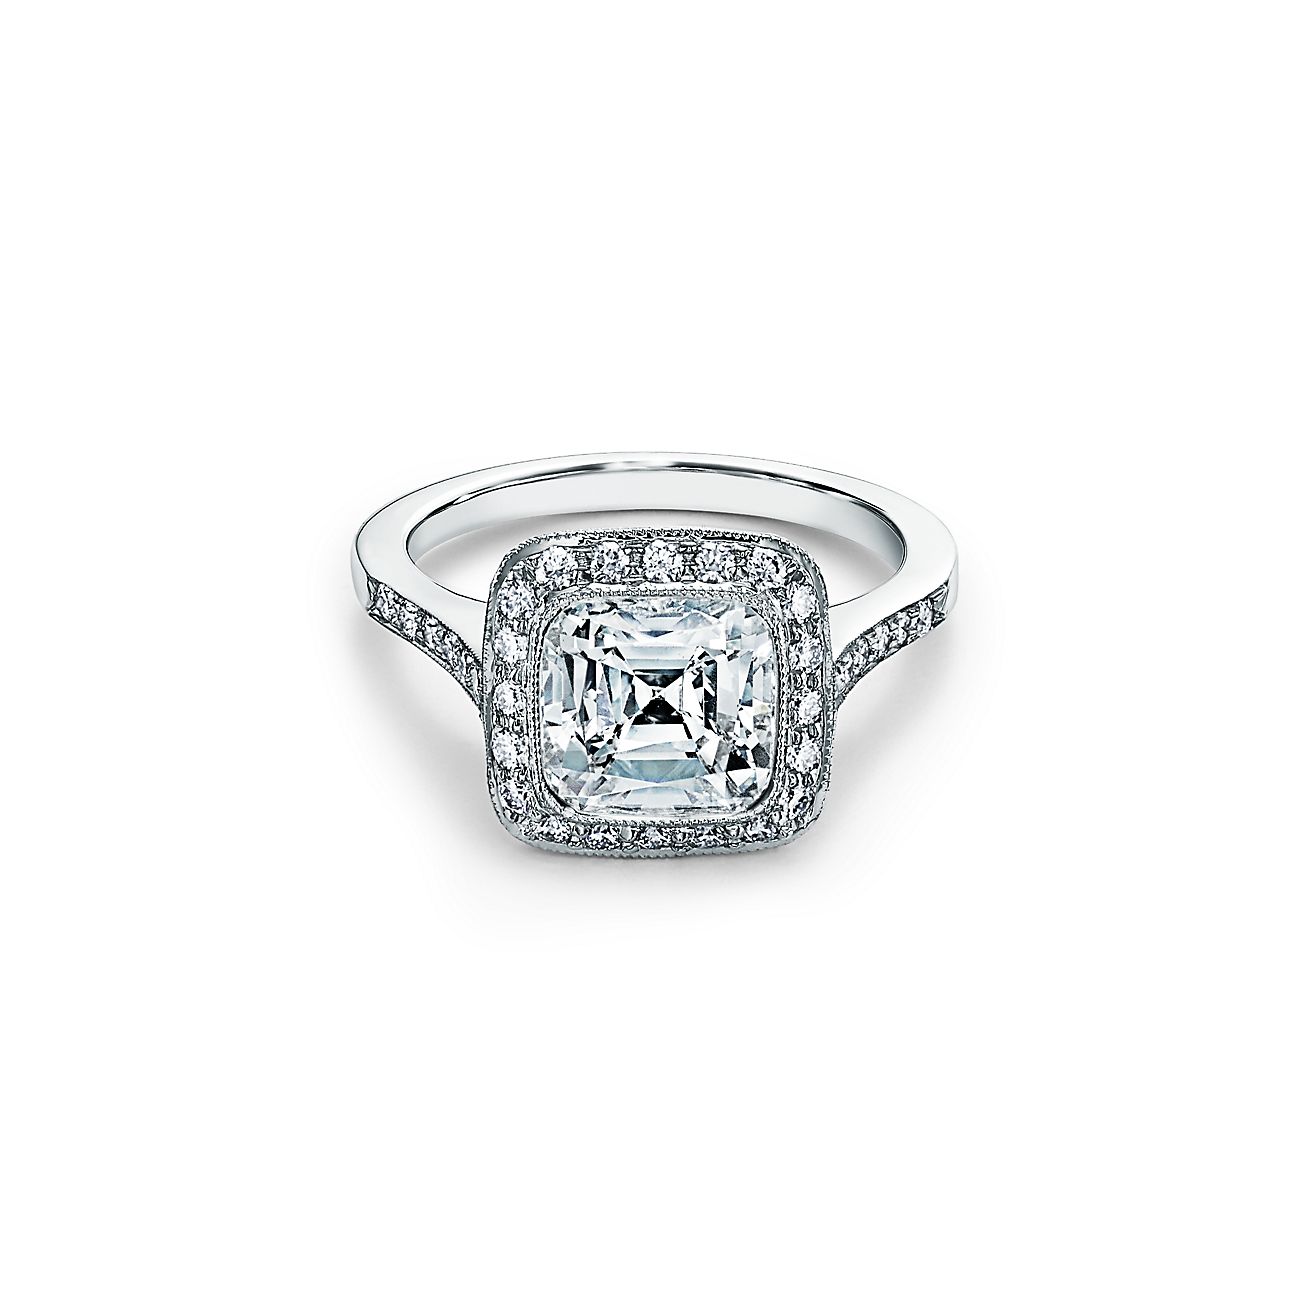 Tiffany Legacy® engagement ring with a 